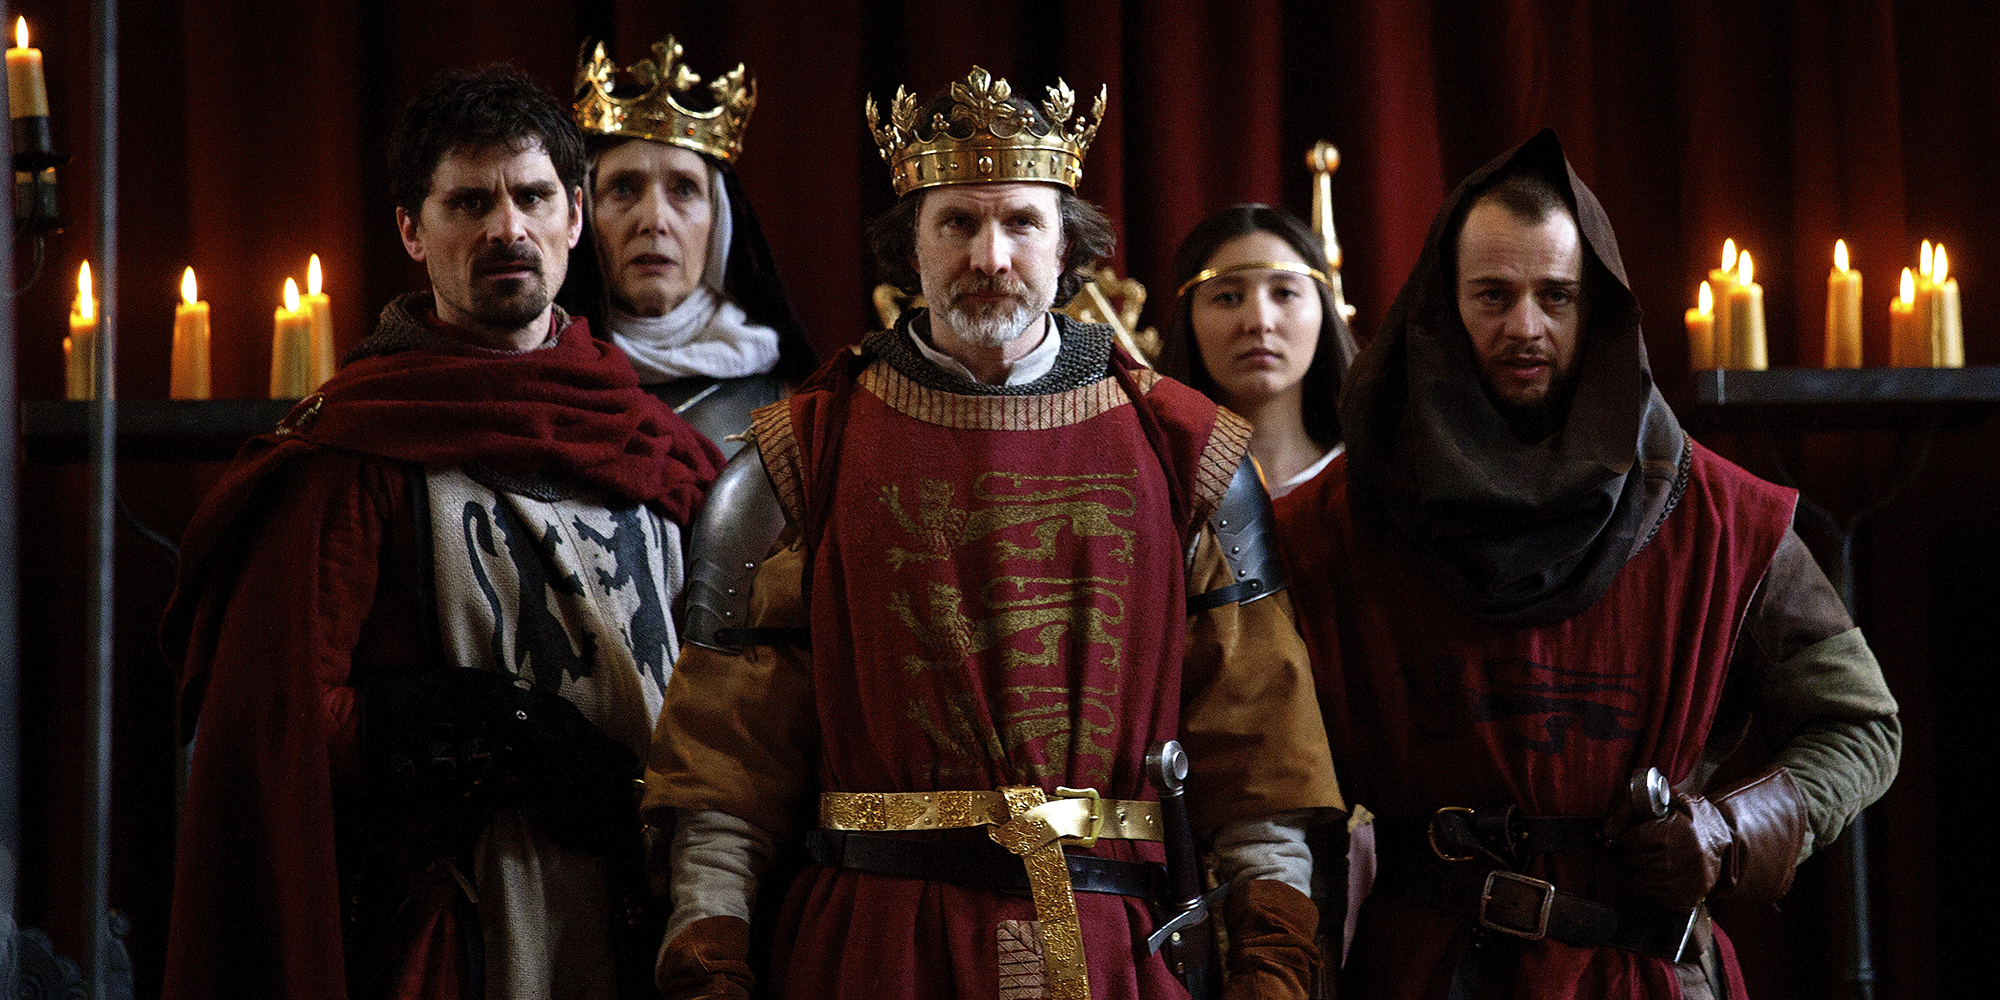 Five actors wearing medieval dress stand clustered together in a group. The actor to the centre wears a golden crown and red tabbard, embroidered with three golden lions.